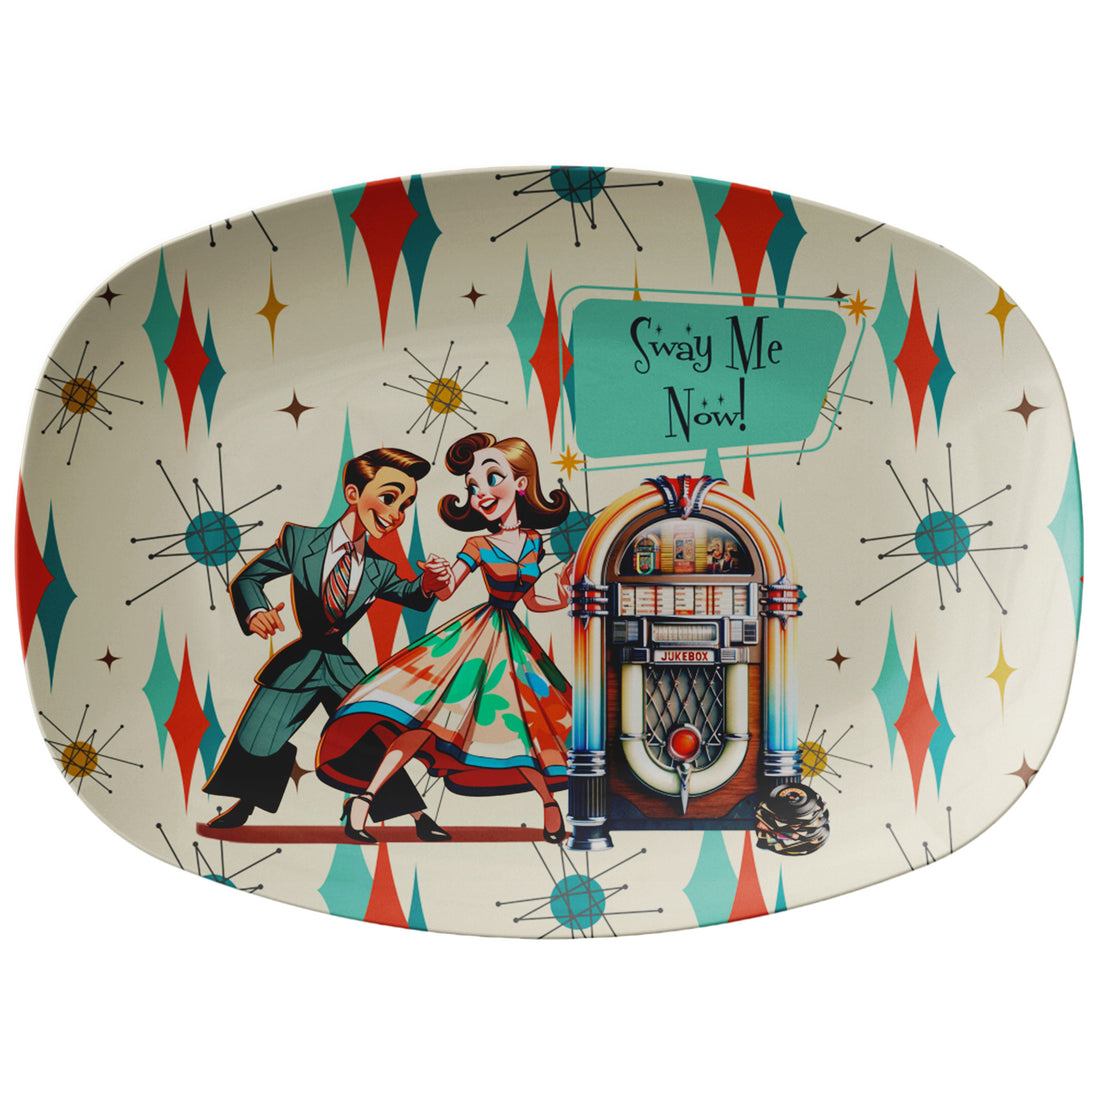 50s Style Couple, Sway Me Now, Kitschy Mid Century Modern Party Platter